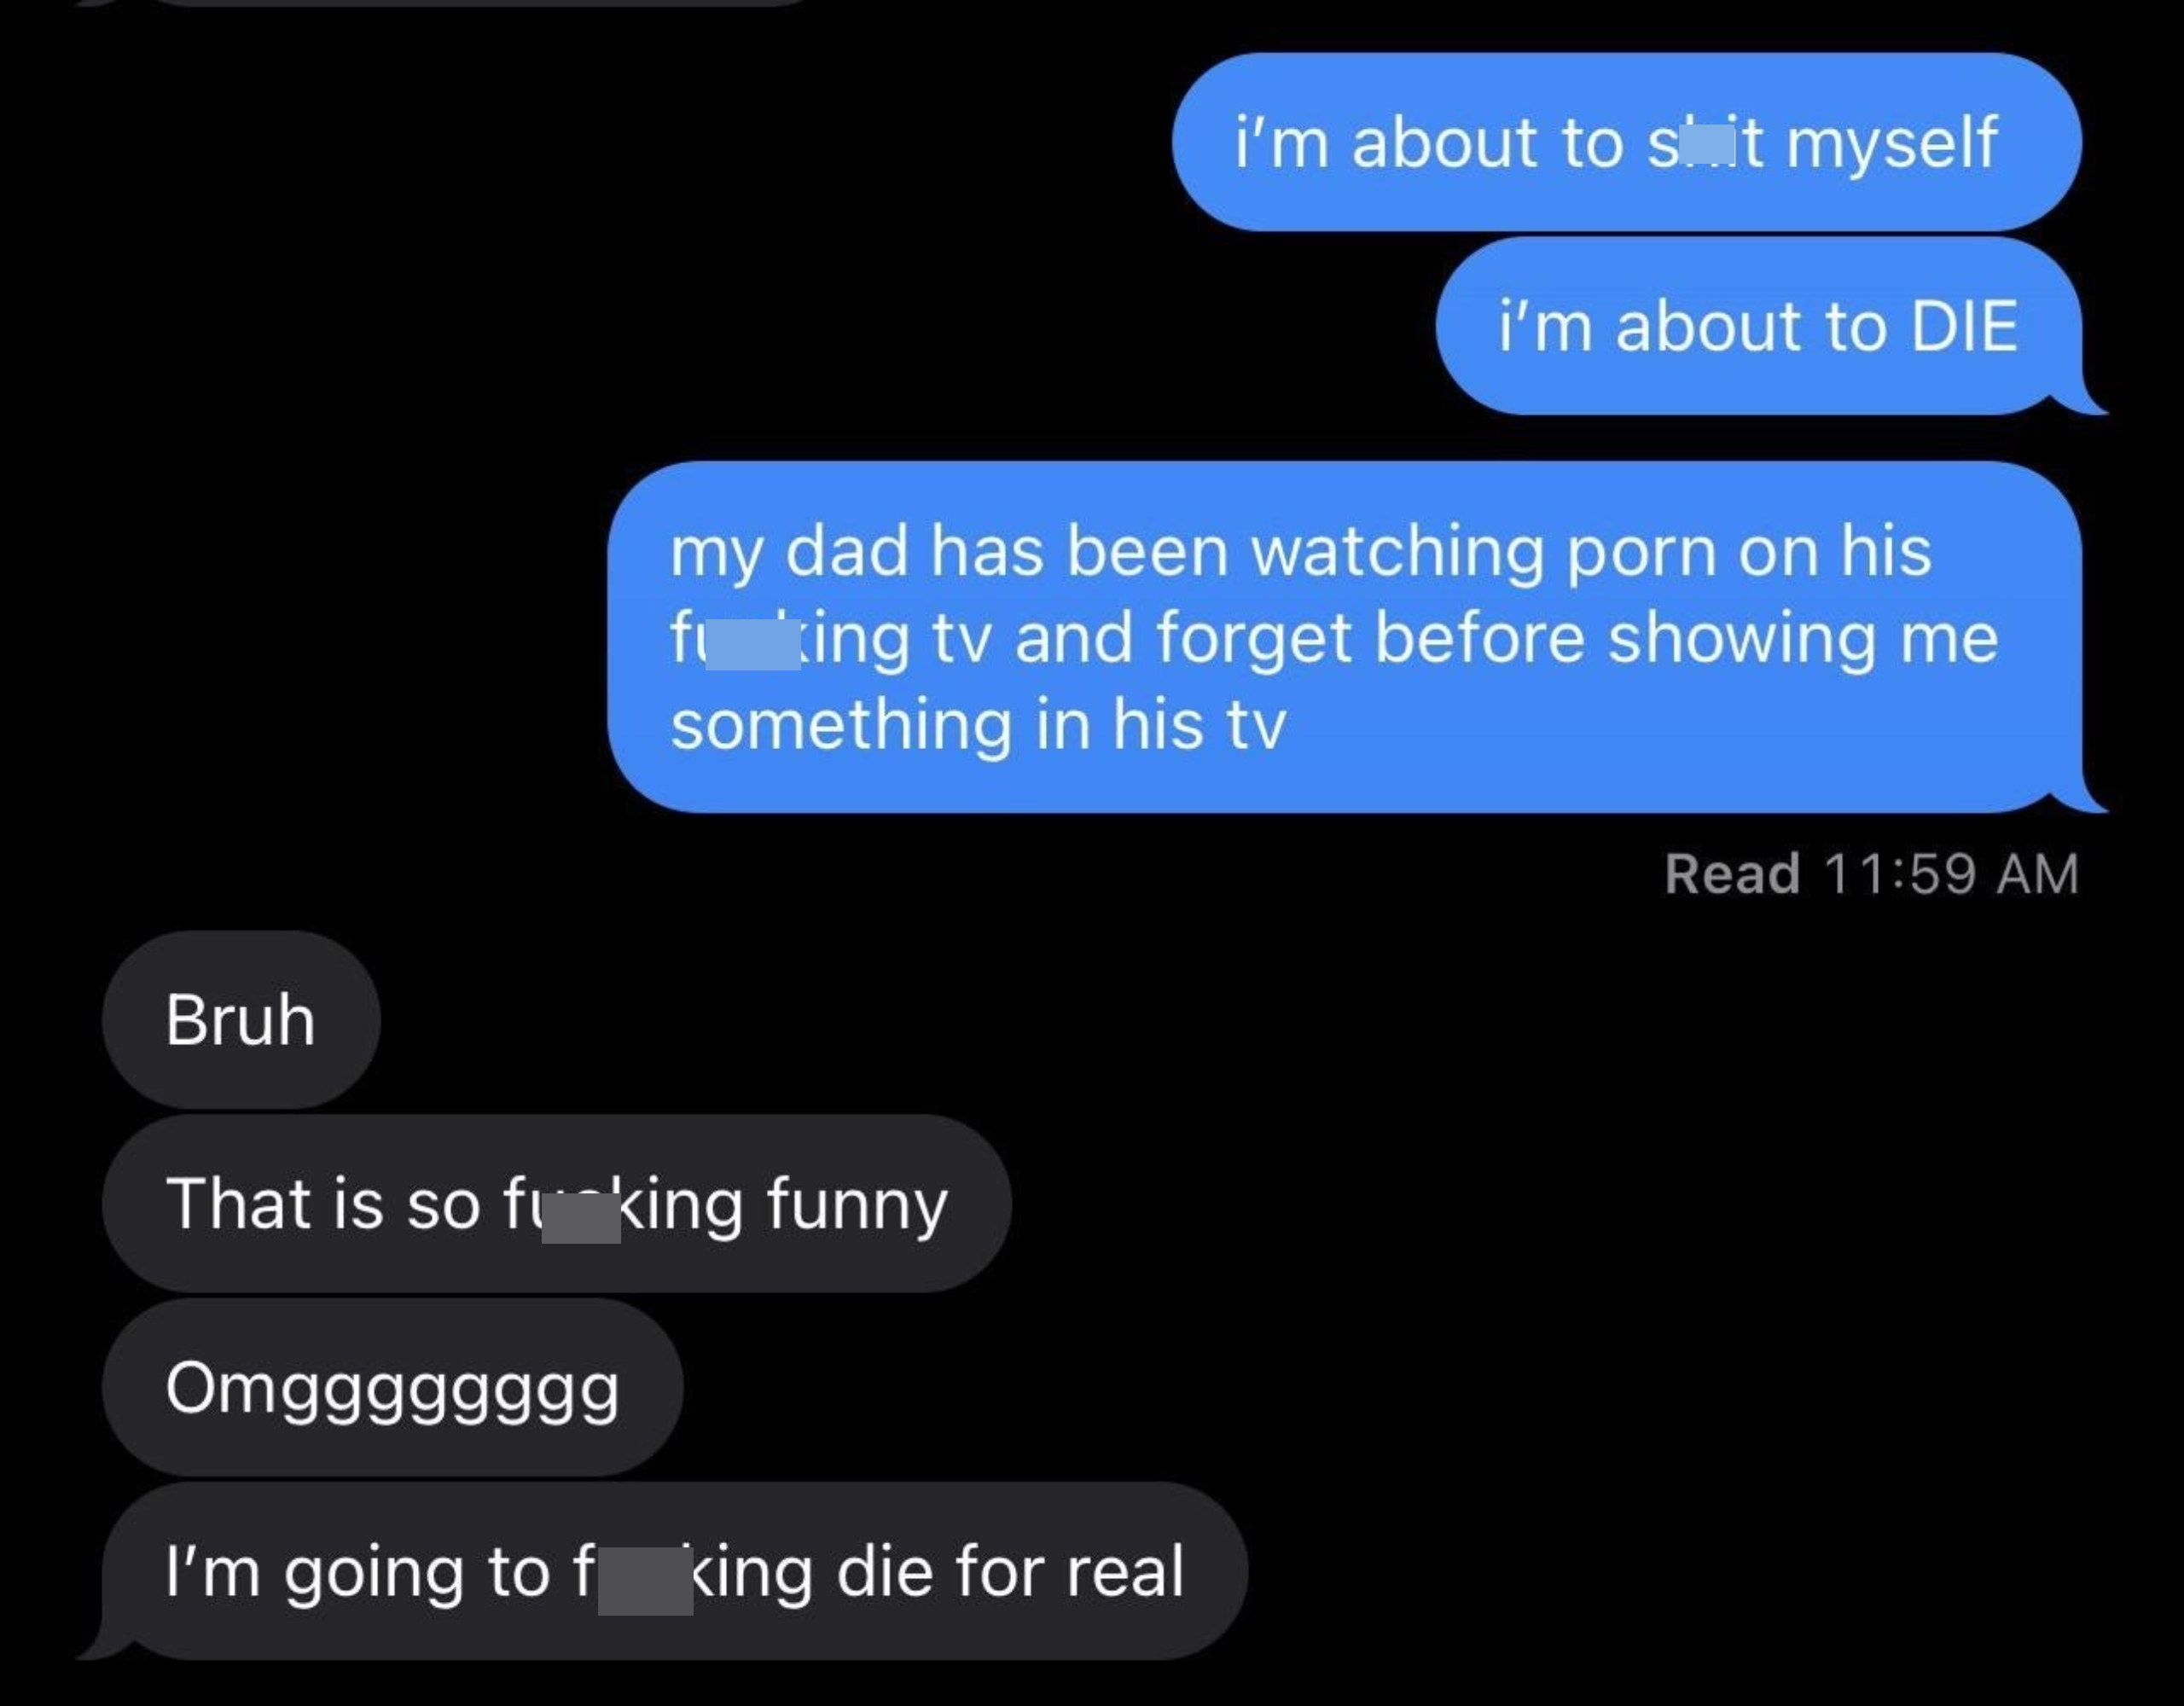 Text exchange with one person saying their father has been watching porn on &quot;his fucking tv&quot; and forgot before showing them something on his TV, and they&#x27;re &quot;about to DIE&quot;